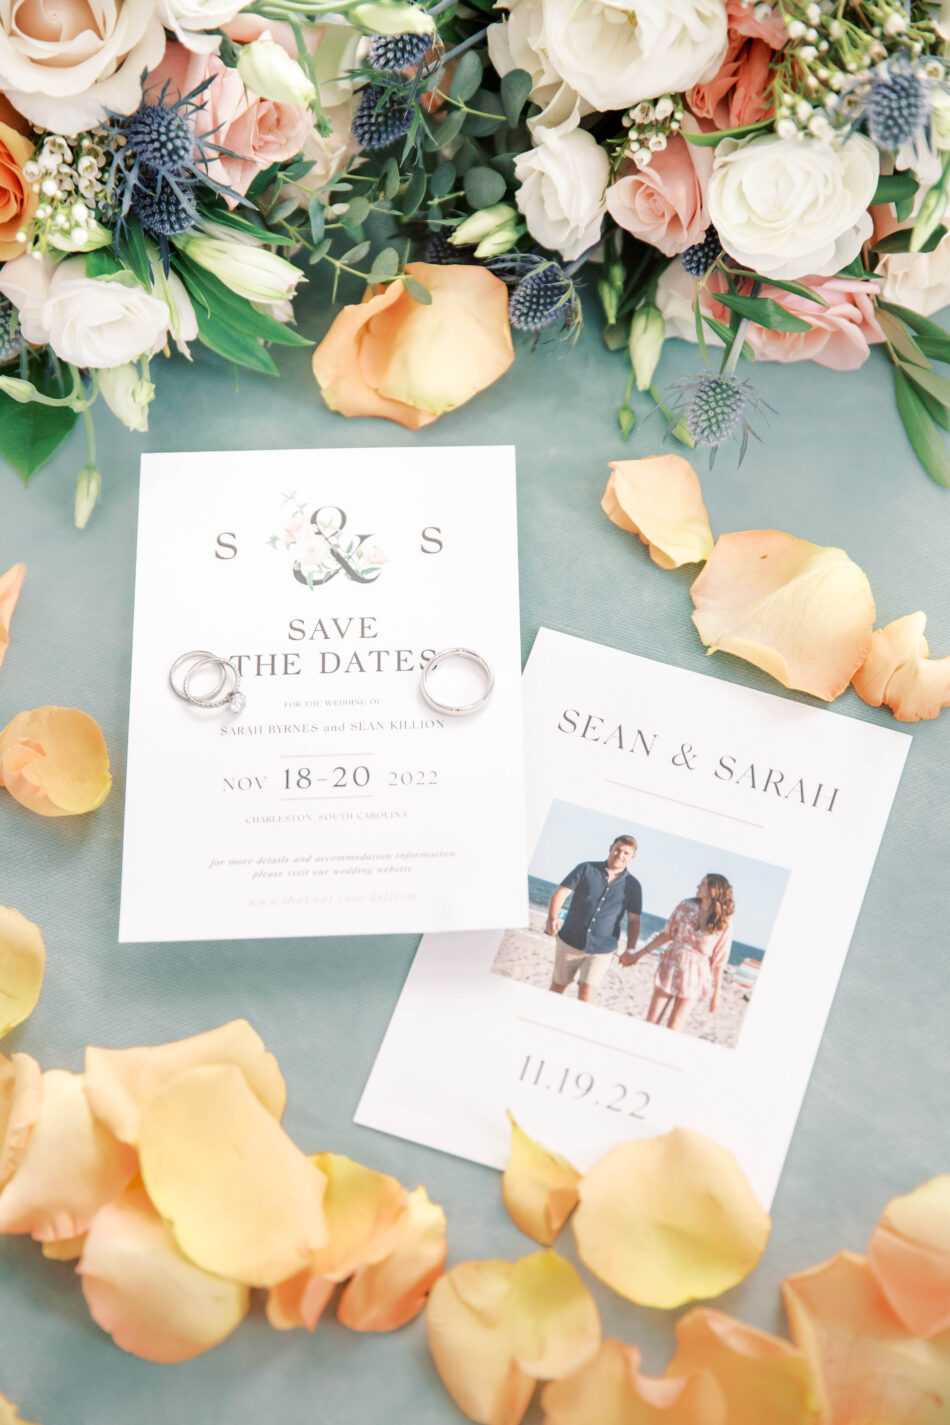 Invitation Suite Flat Lay at Charleston Harbor. Kate Timbers Photography. http://katetimbers.com #katetimbersphotography // Charleston Photography // Inspiration. Elizabeth Elkins Events